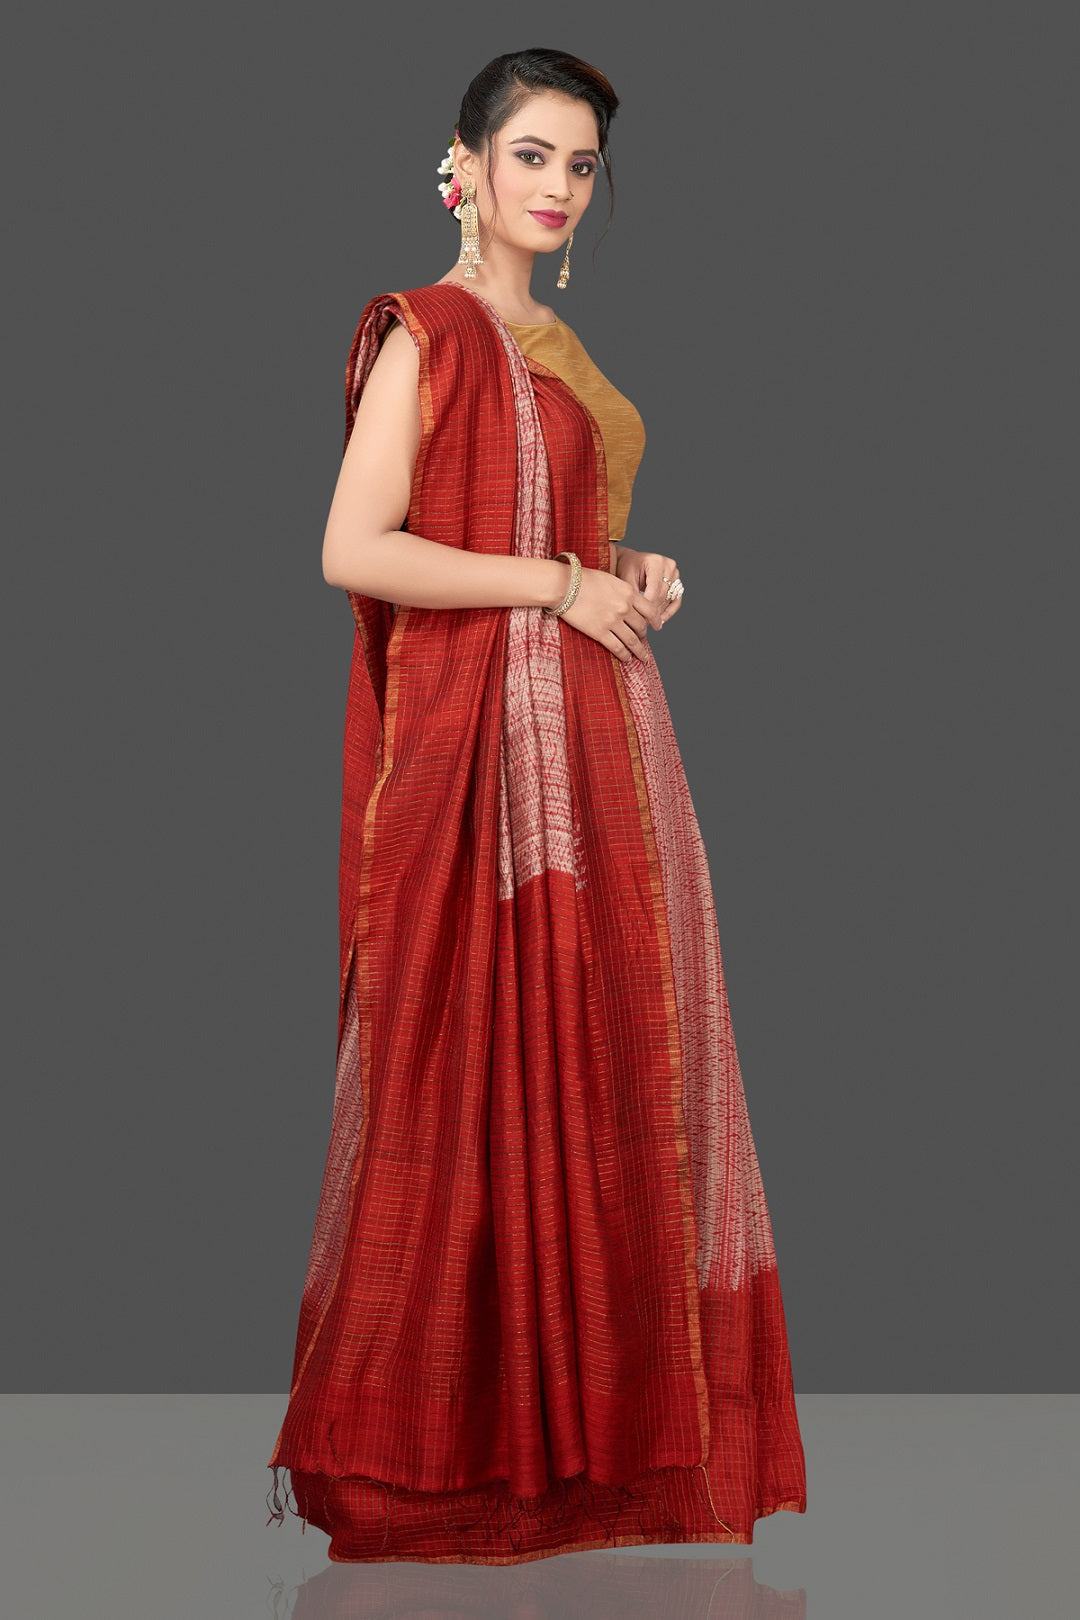 Buy stunning pink and red matka shibori saree online in USA with check zari border. Flaunt Indian fashion in USA with a stunning collection of handwoven sarees, cotton sarees, pure silk sarees, printed saris in USA from Pure Elegance Indian saree store in USA.-pallu